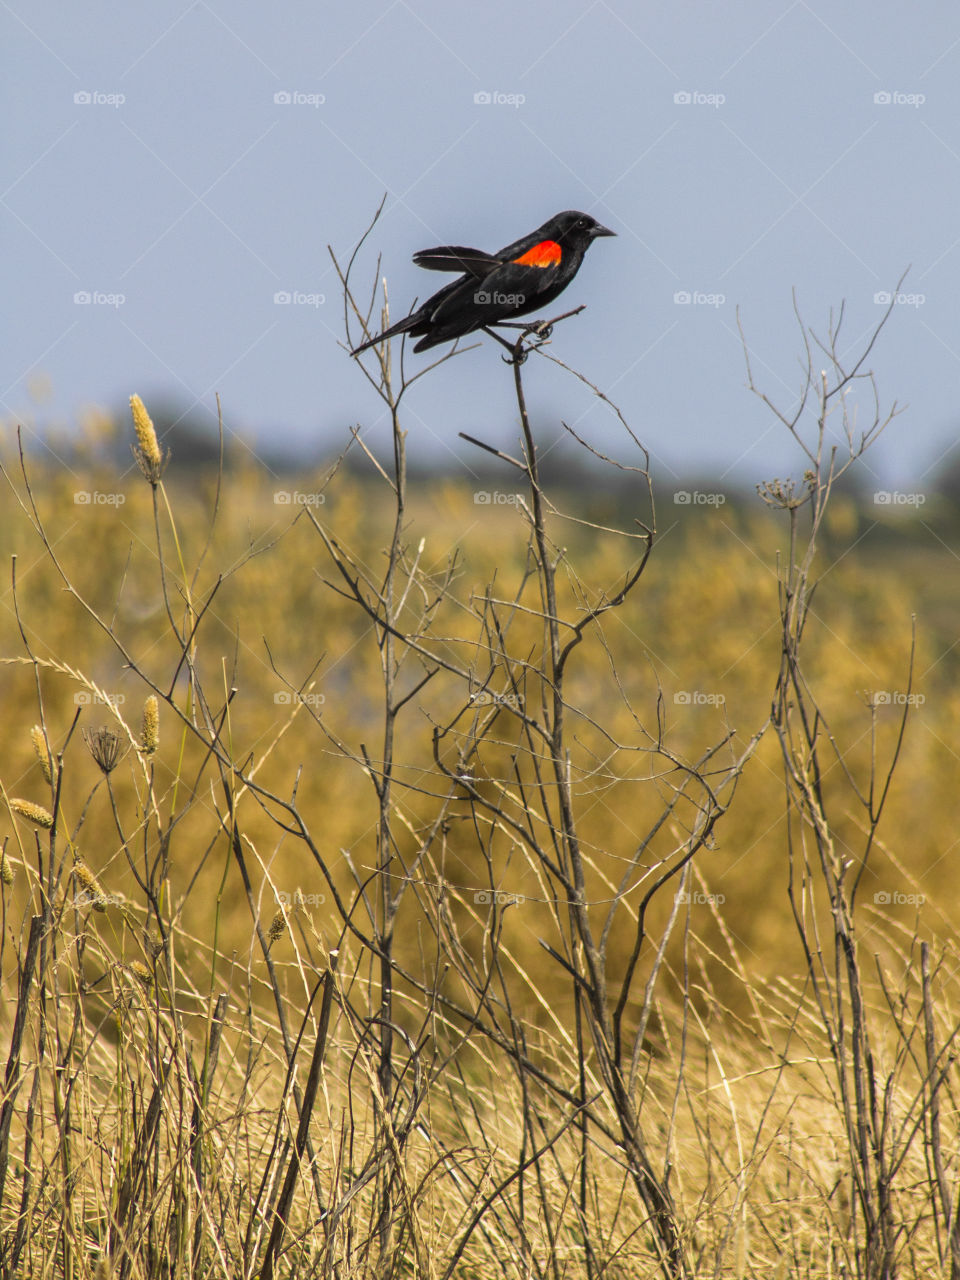 Red-winged blackbird, taken in the Yolo Bypass Wildlife Area